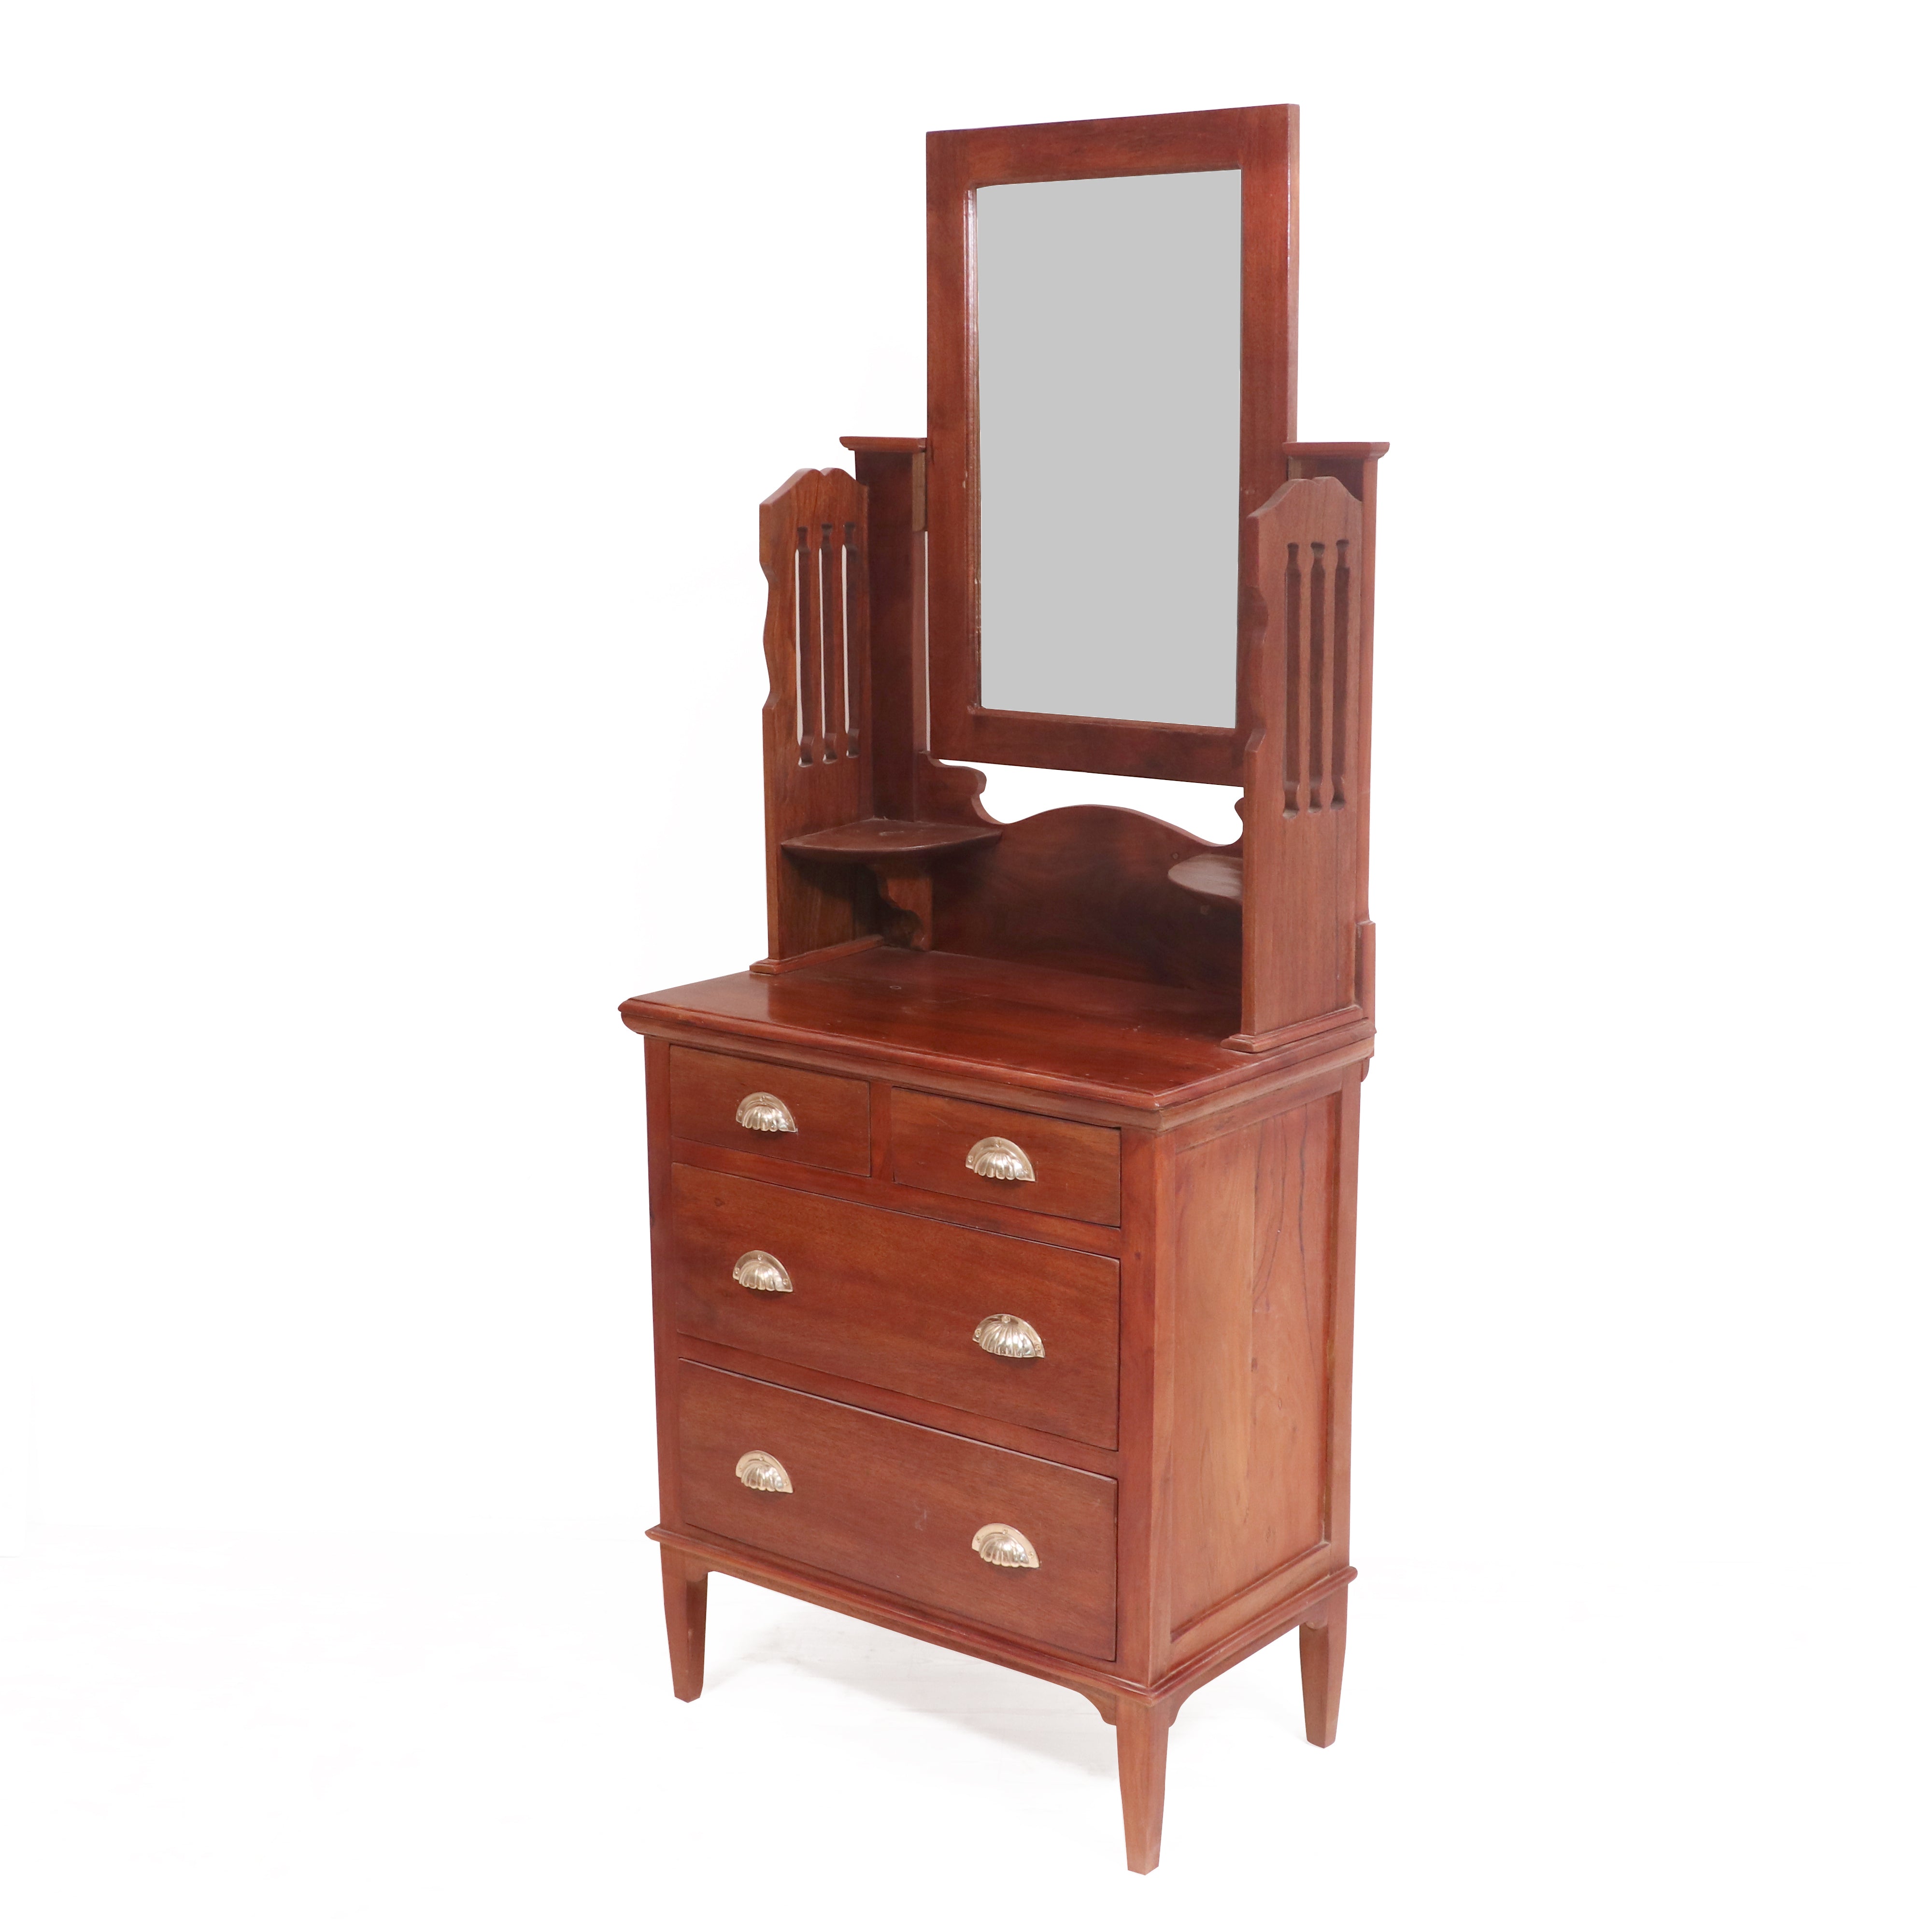 Basicwise Black Modern Wooden Vanity Dressing Table with 2-Drawers, LED  Mirror and Stool QI004268L.BK - The Home Depot